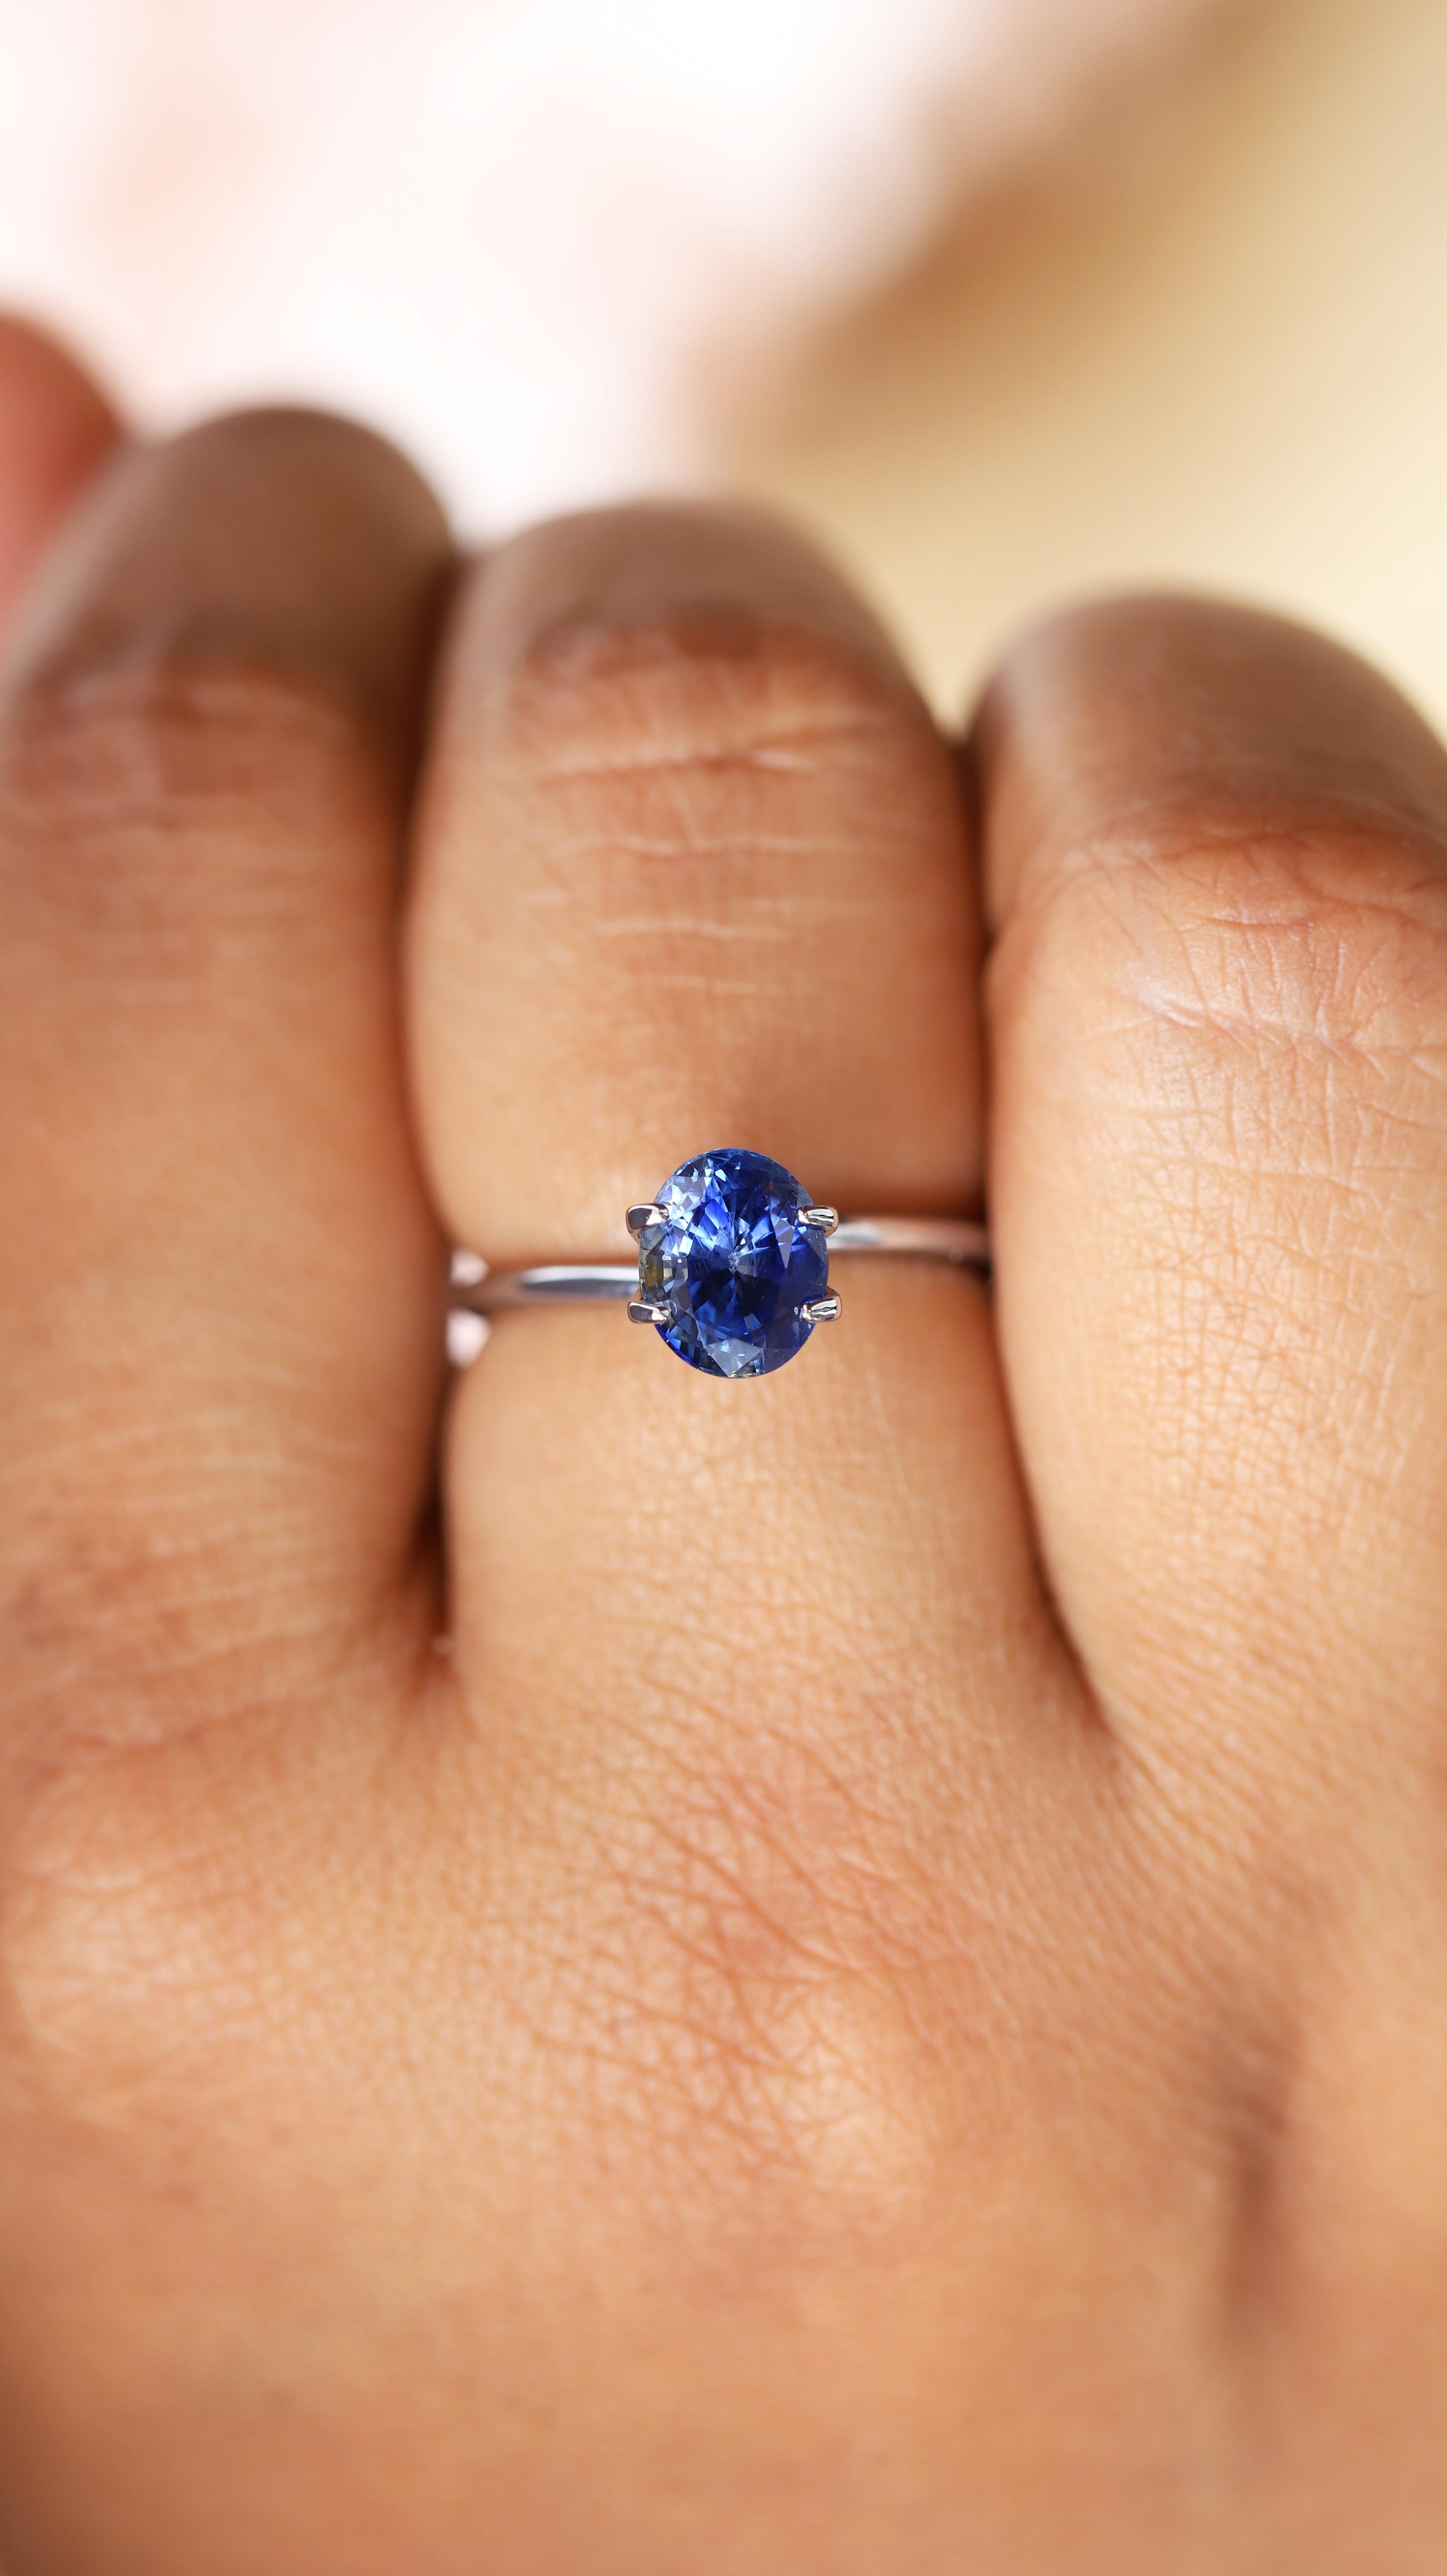 The celestial appeal of blue sapphires is incontestable, especially when they come in such rich tones of blue. 

Sculpted into a classic oval weighing over 2 carat, this natural sapphire features a captivating fusion of intense blue hues whilst